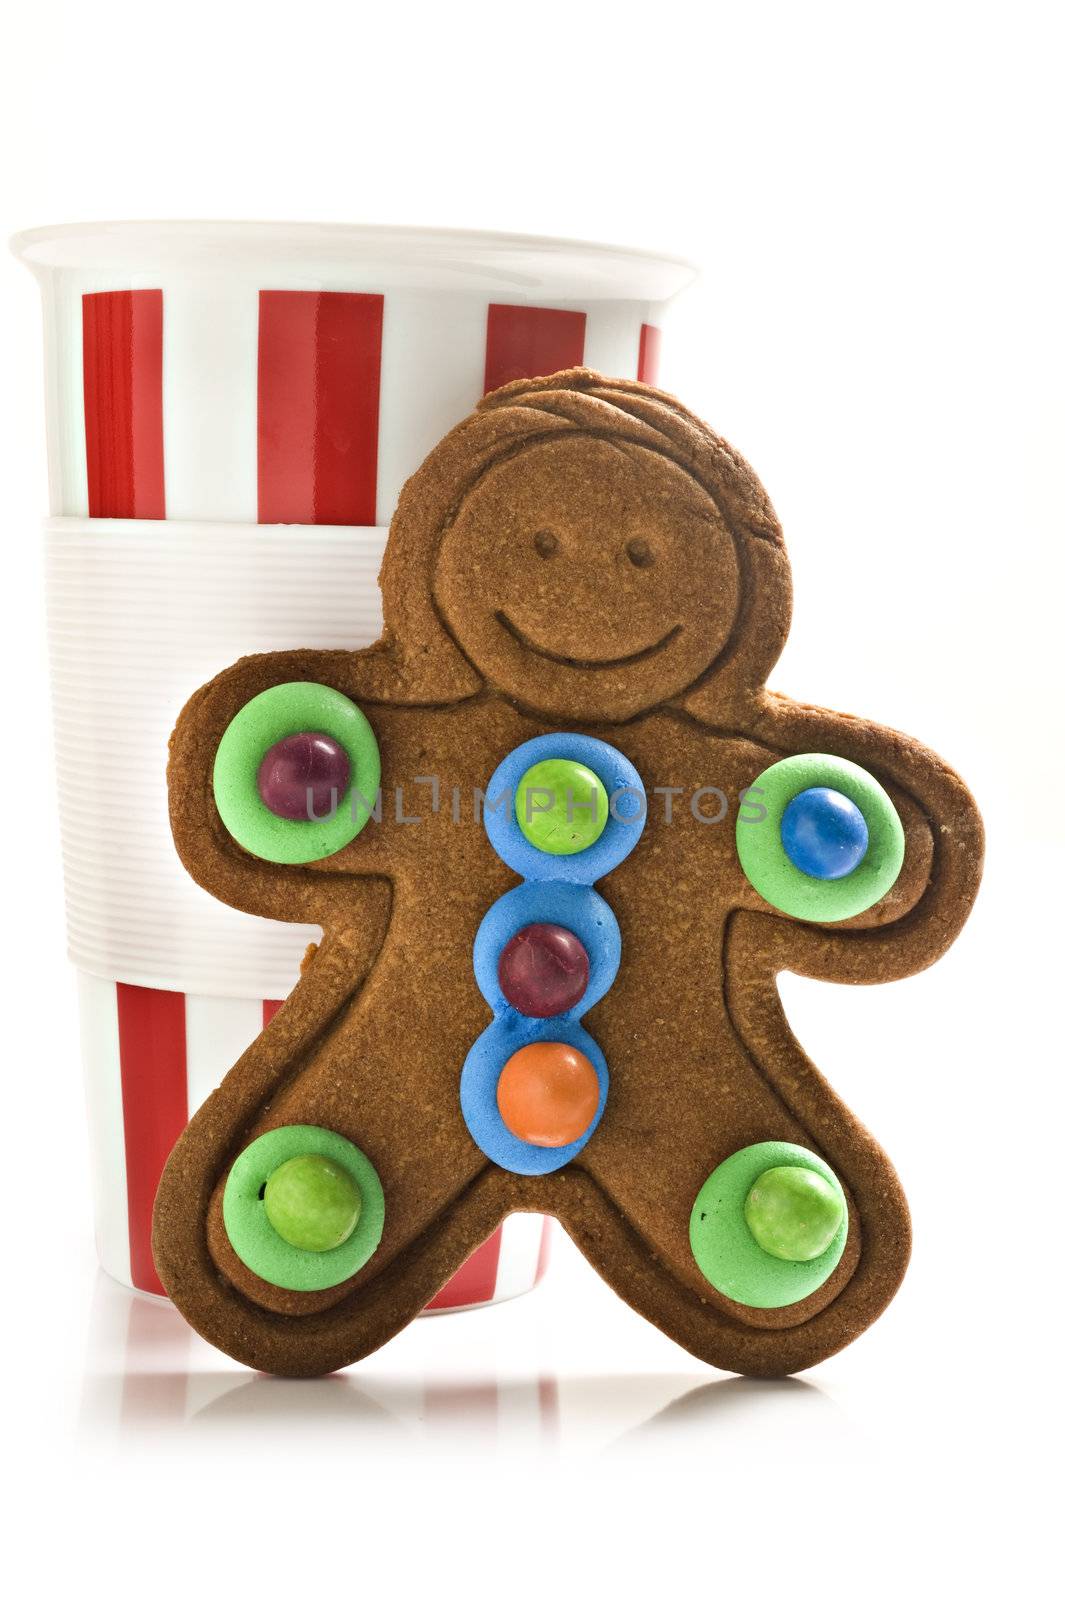 Gingerbread man and coffee by tish1